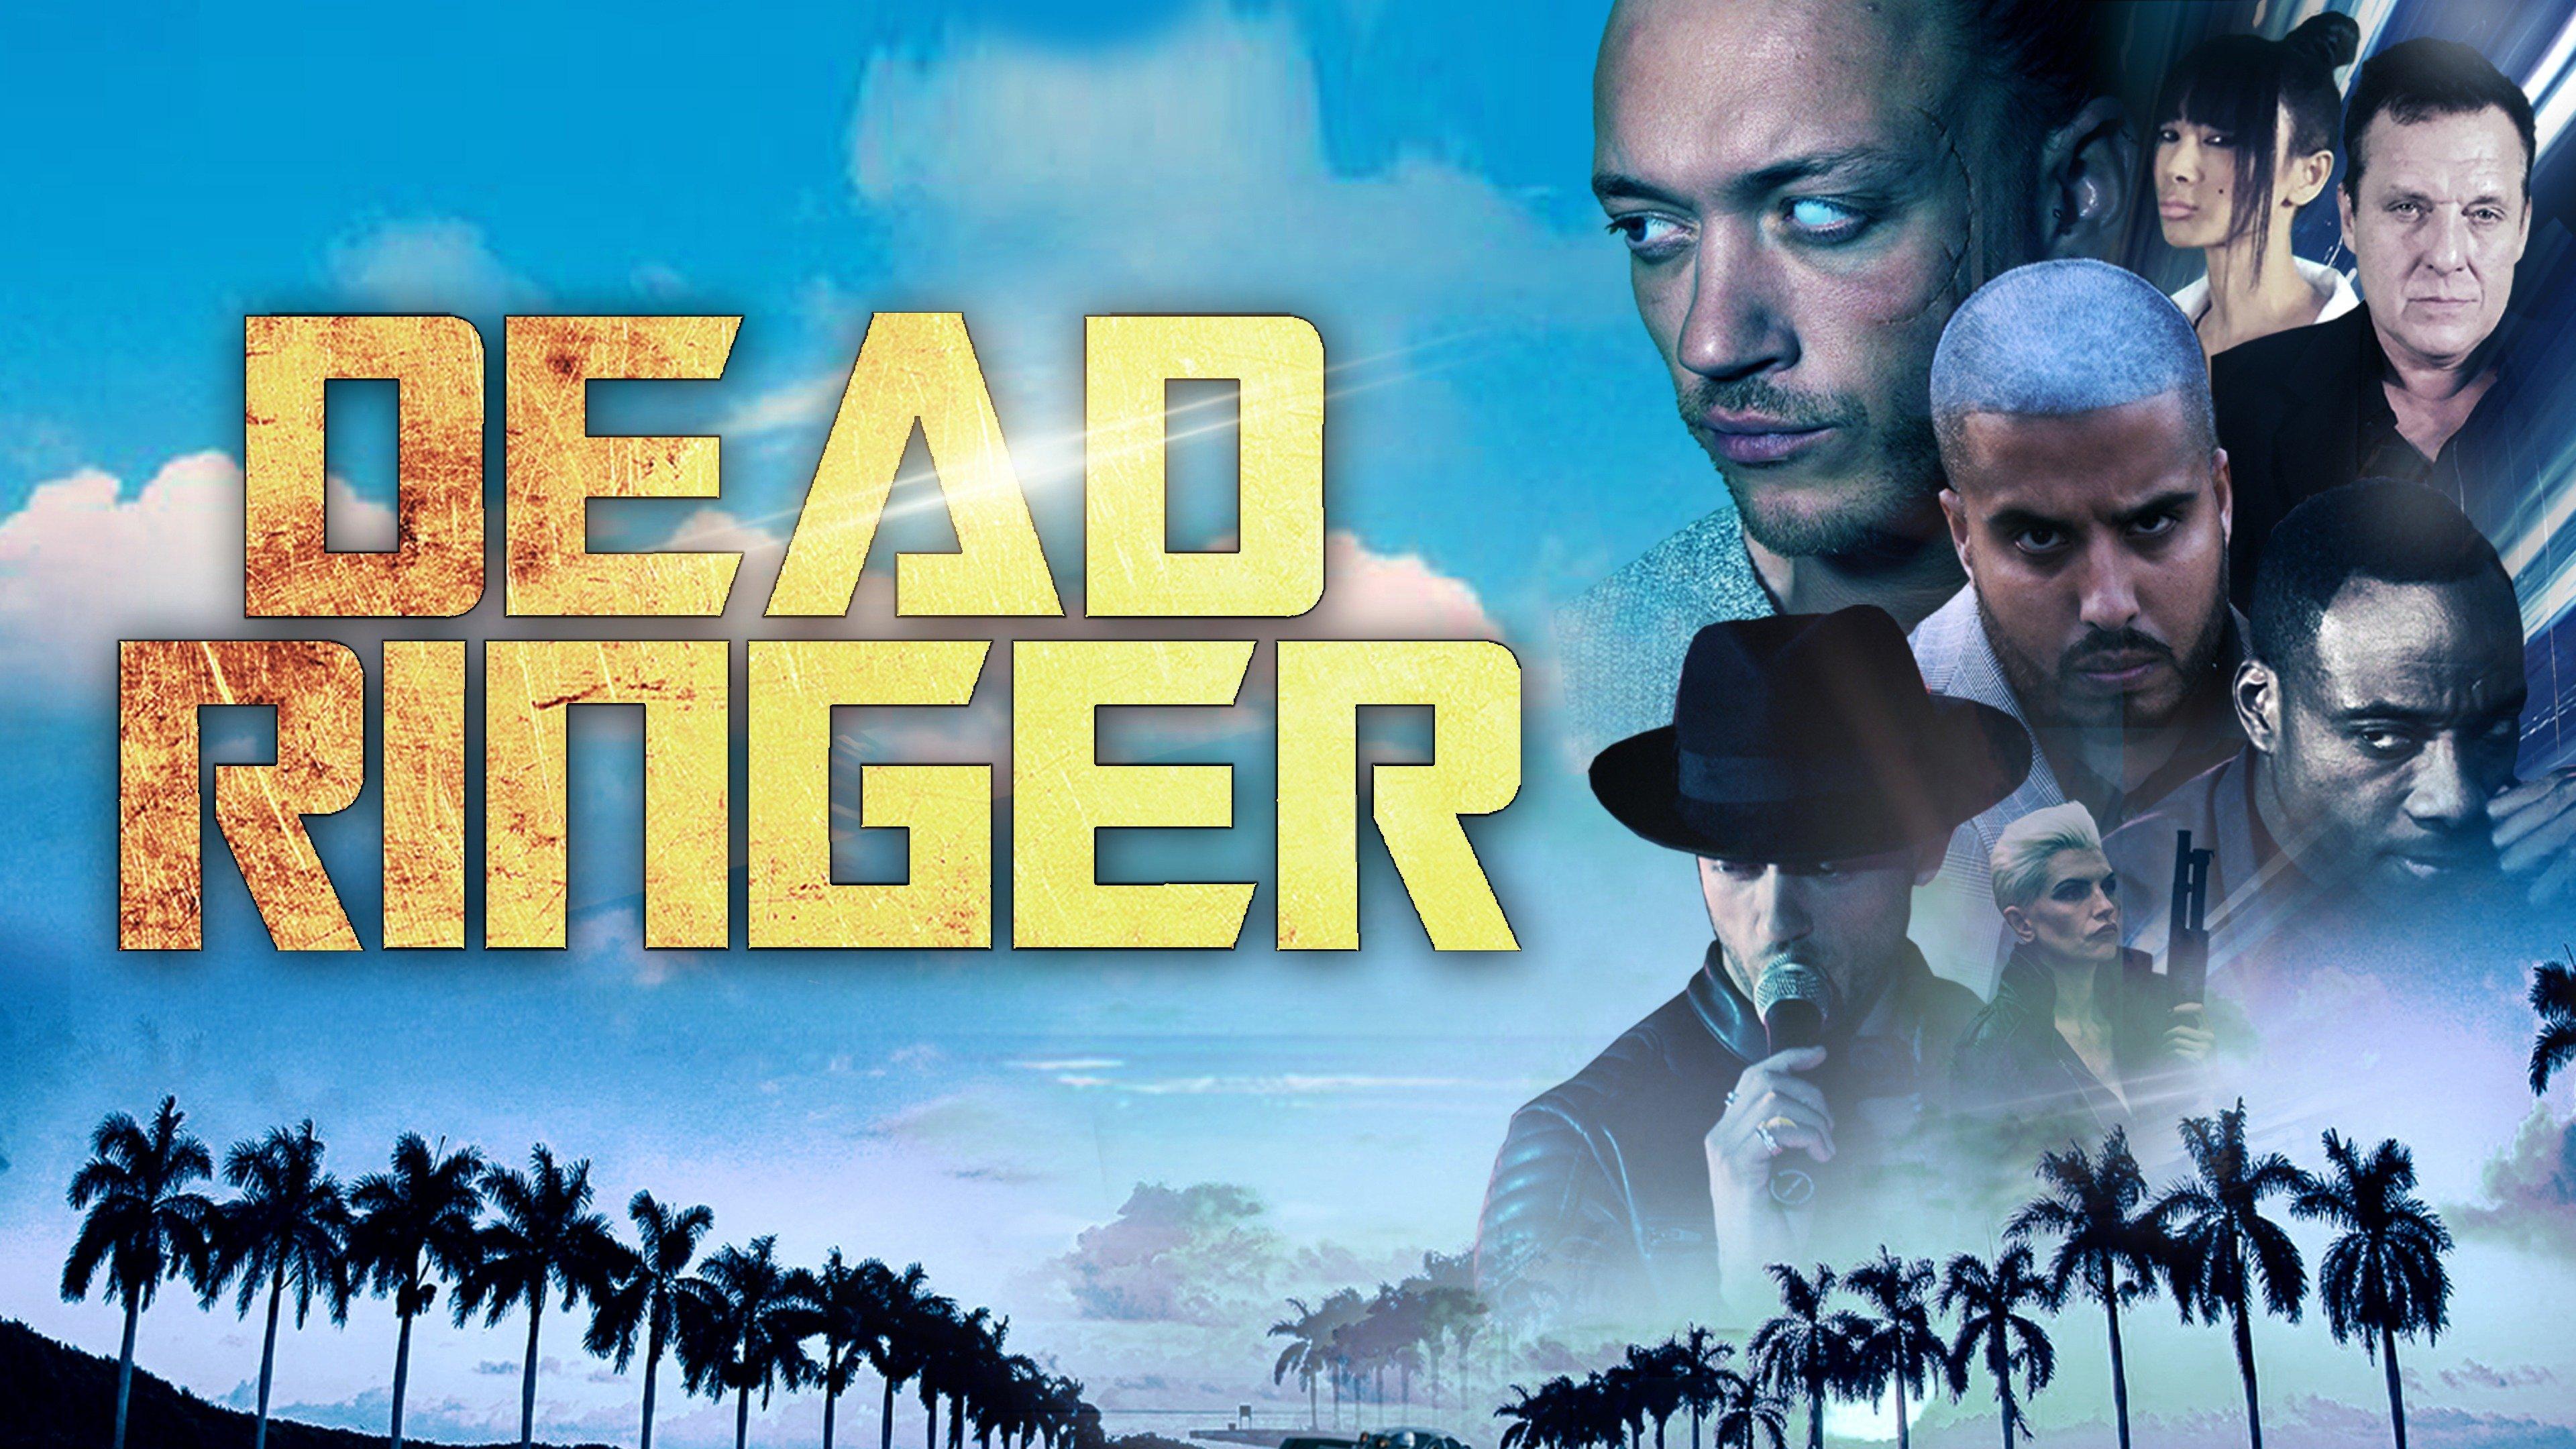 Watch Dead Ringer Streaming Online on Philo (Free Trial)